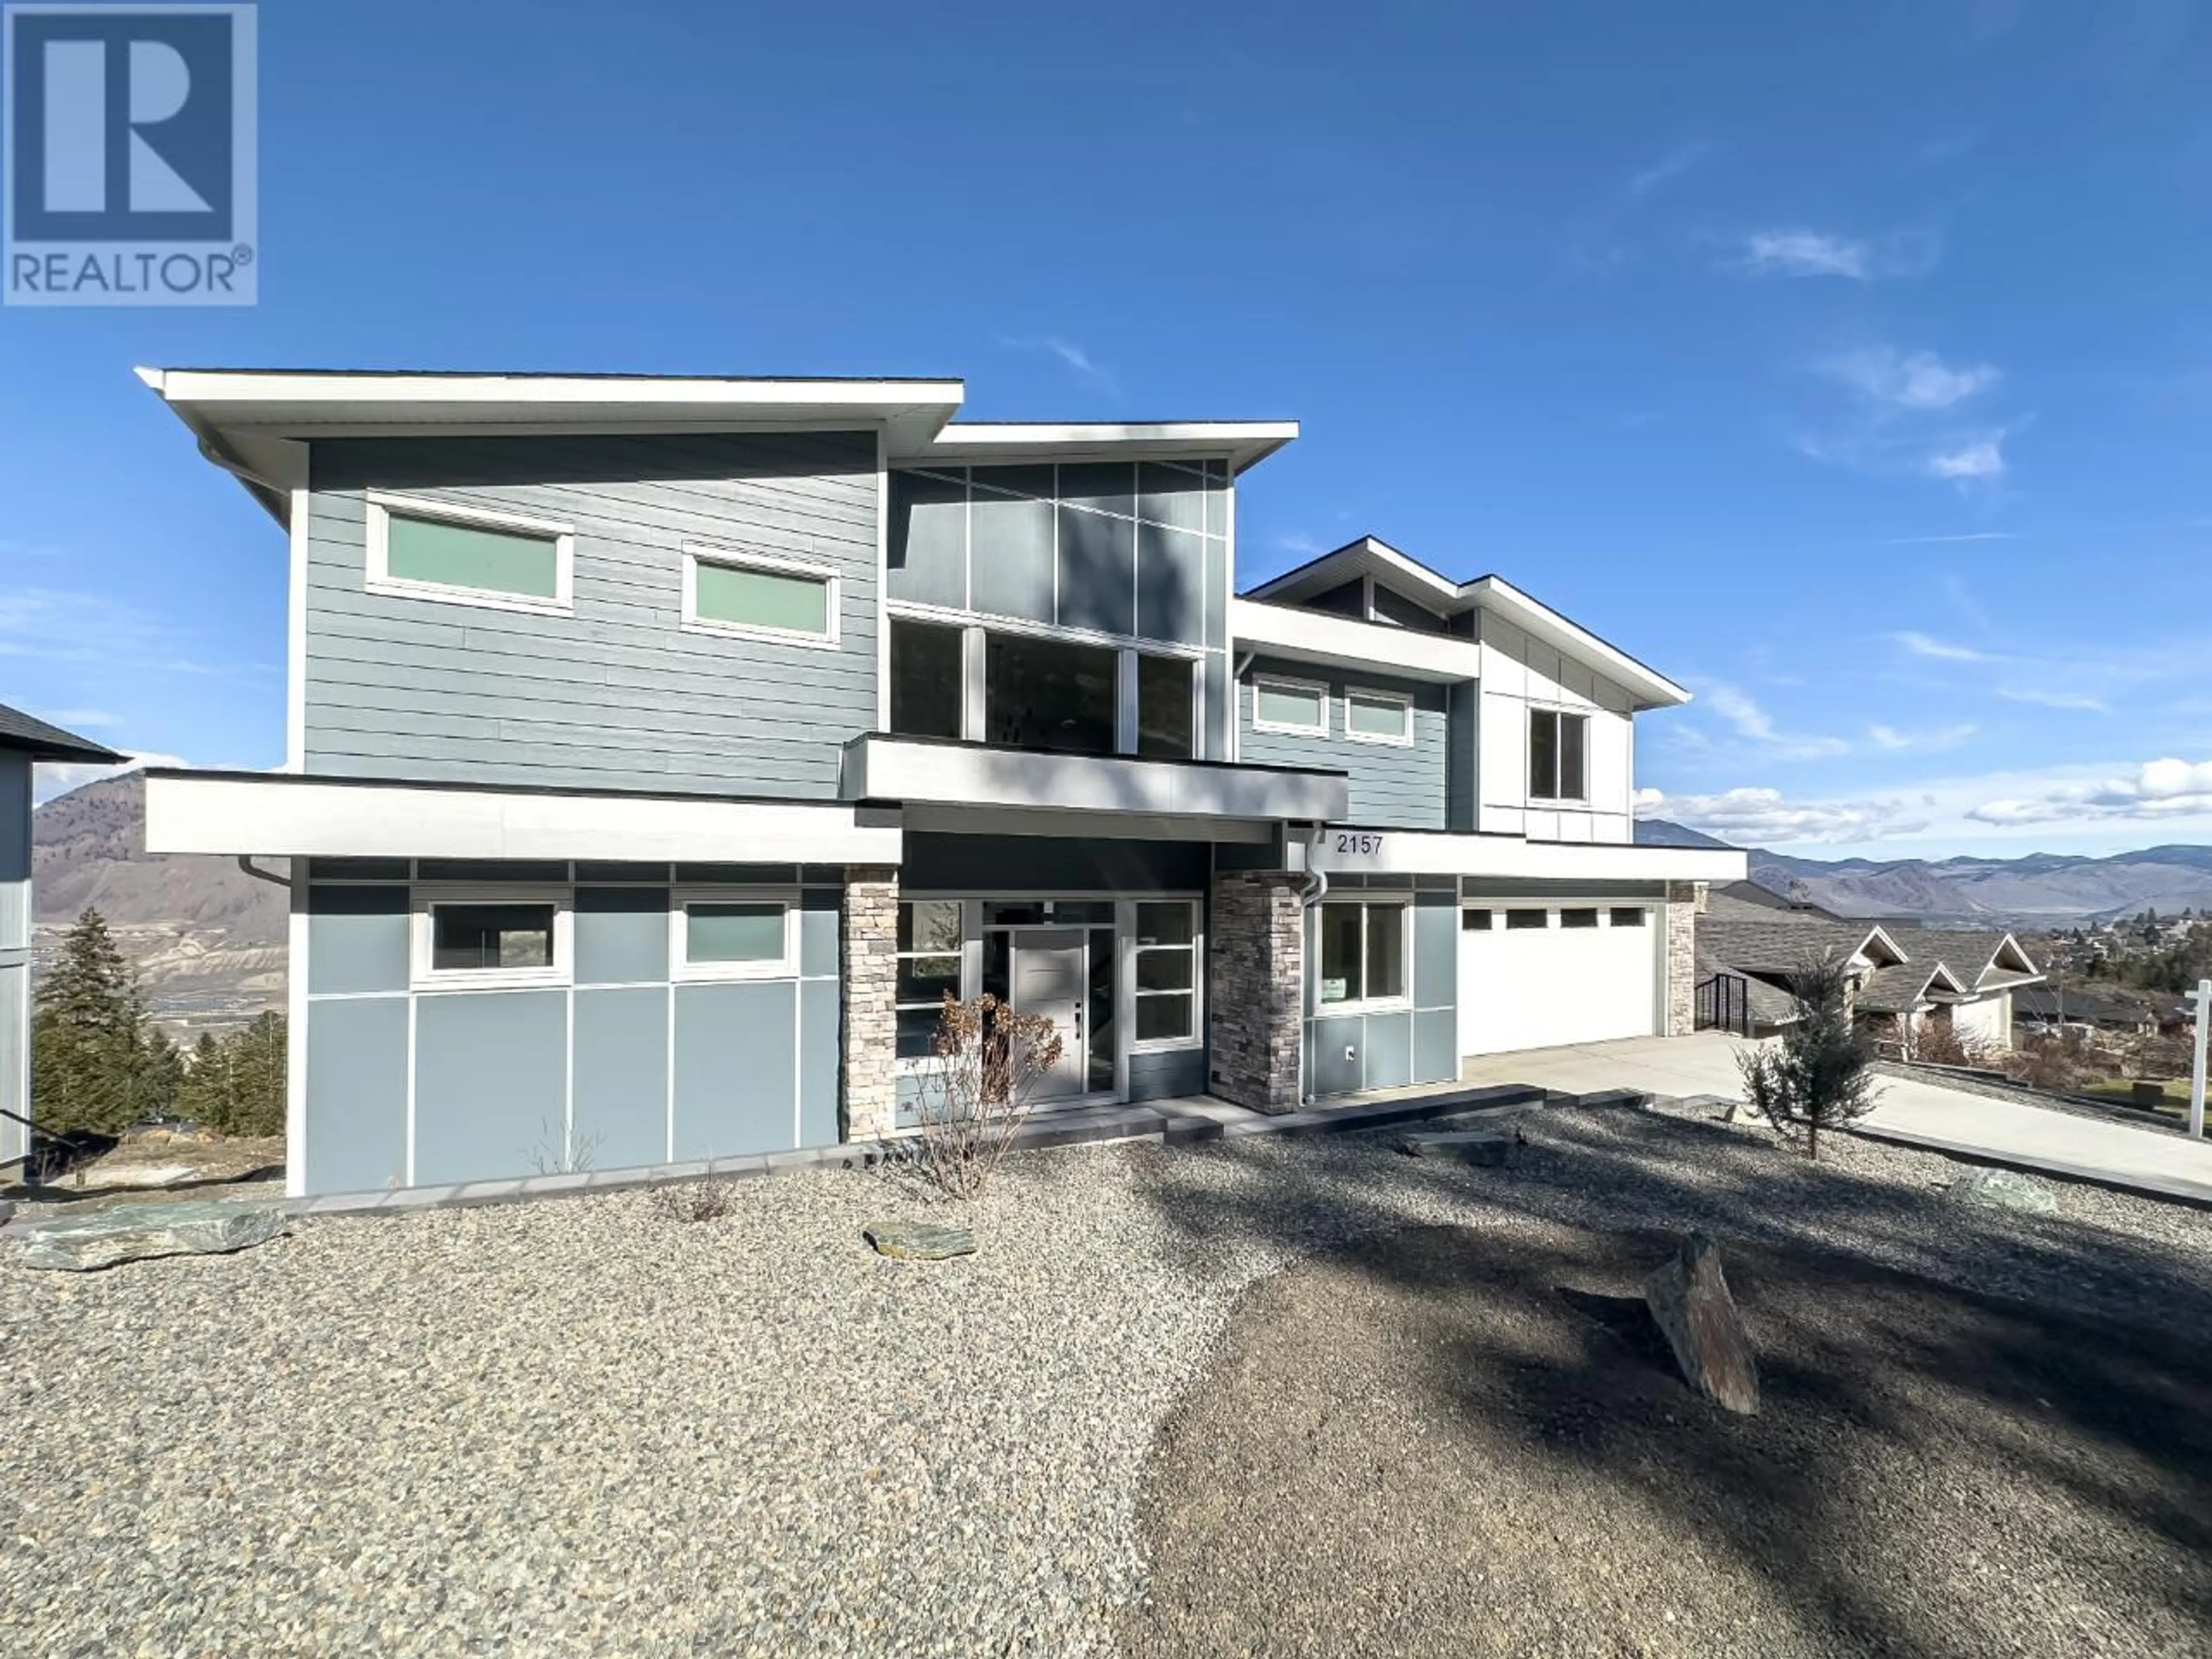 Home with vinyl exterior material for 2157 COLDWATER DRIVE, Kamloops British Columbia V2E2R5